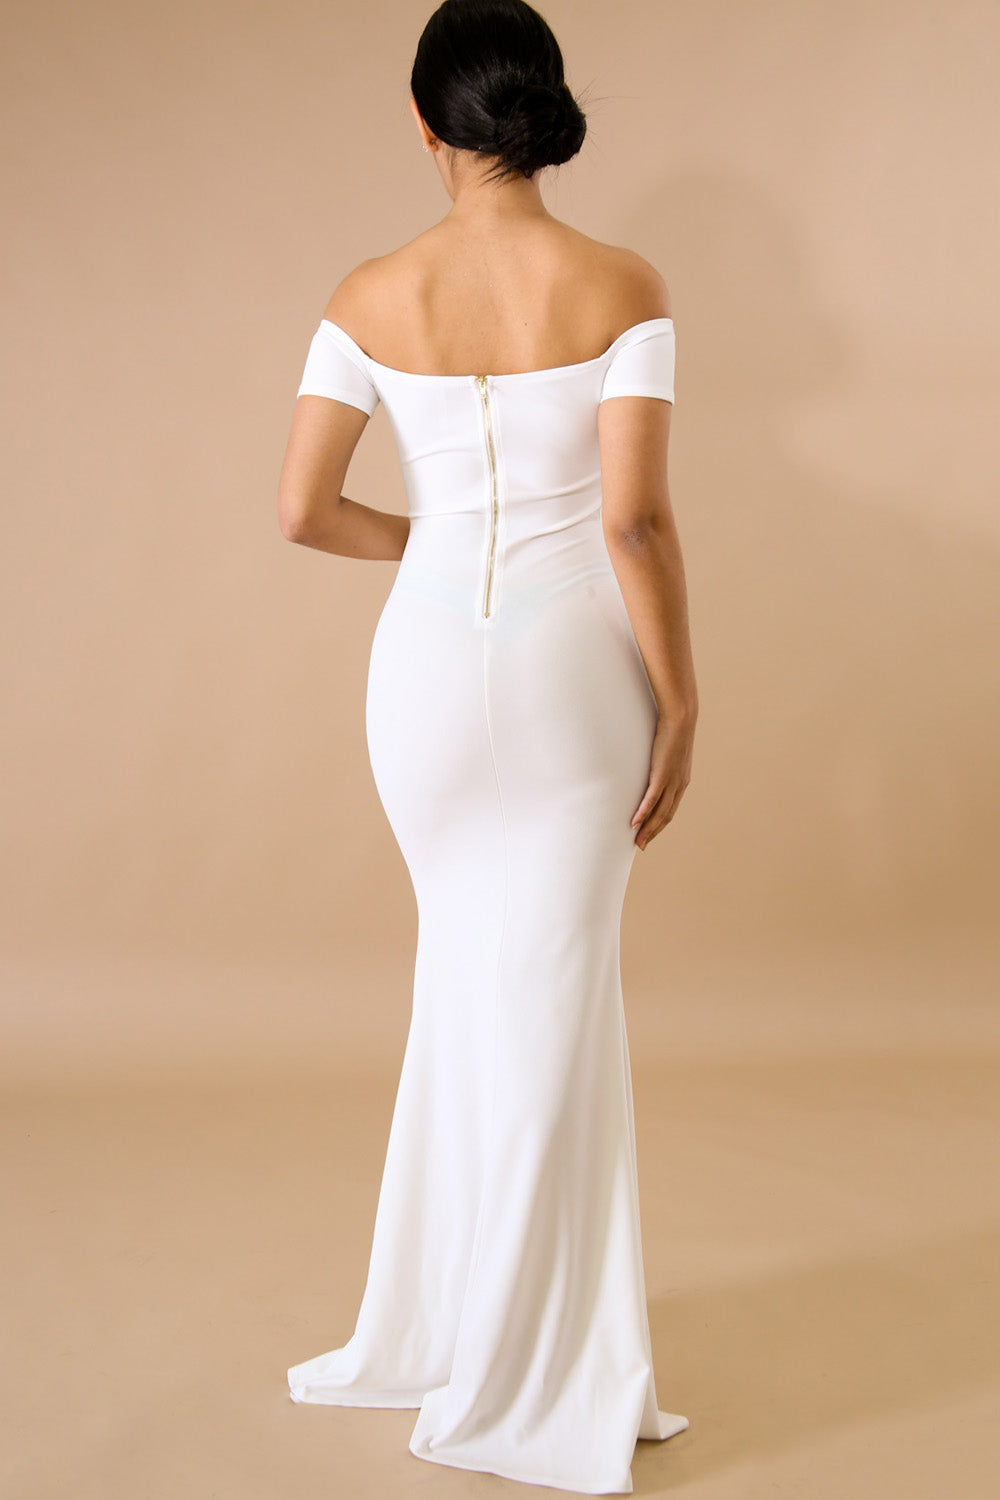 goPals full length white off-the-shoulder dress with thigh high slit. 